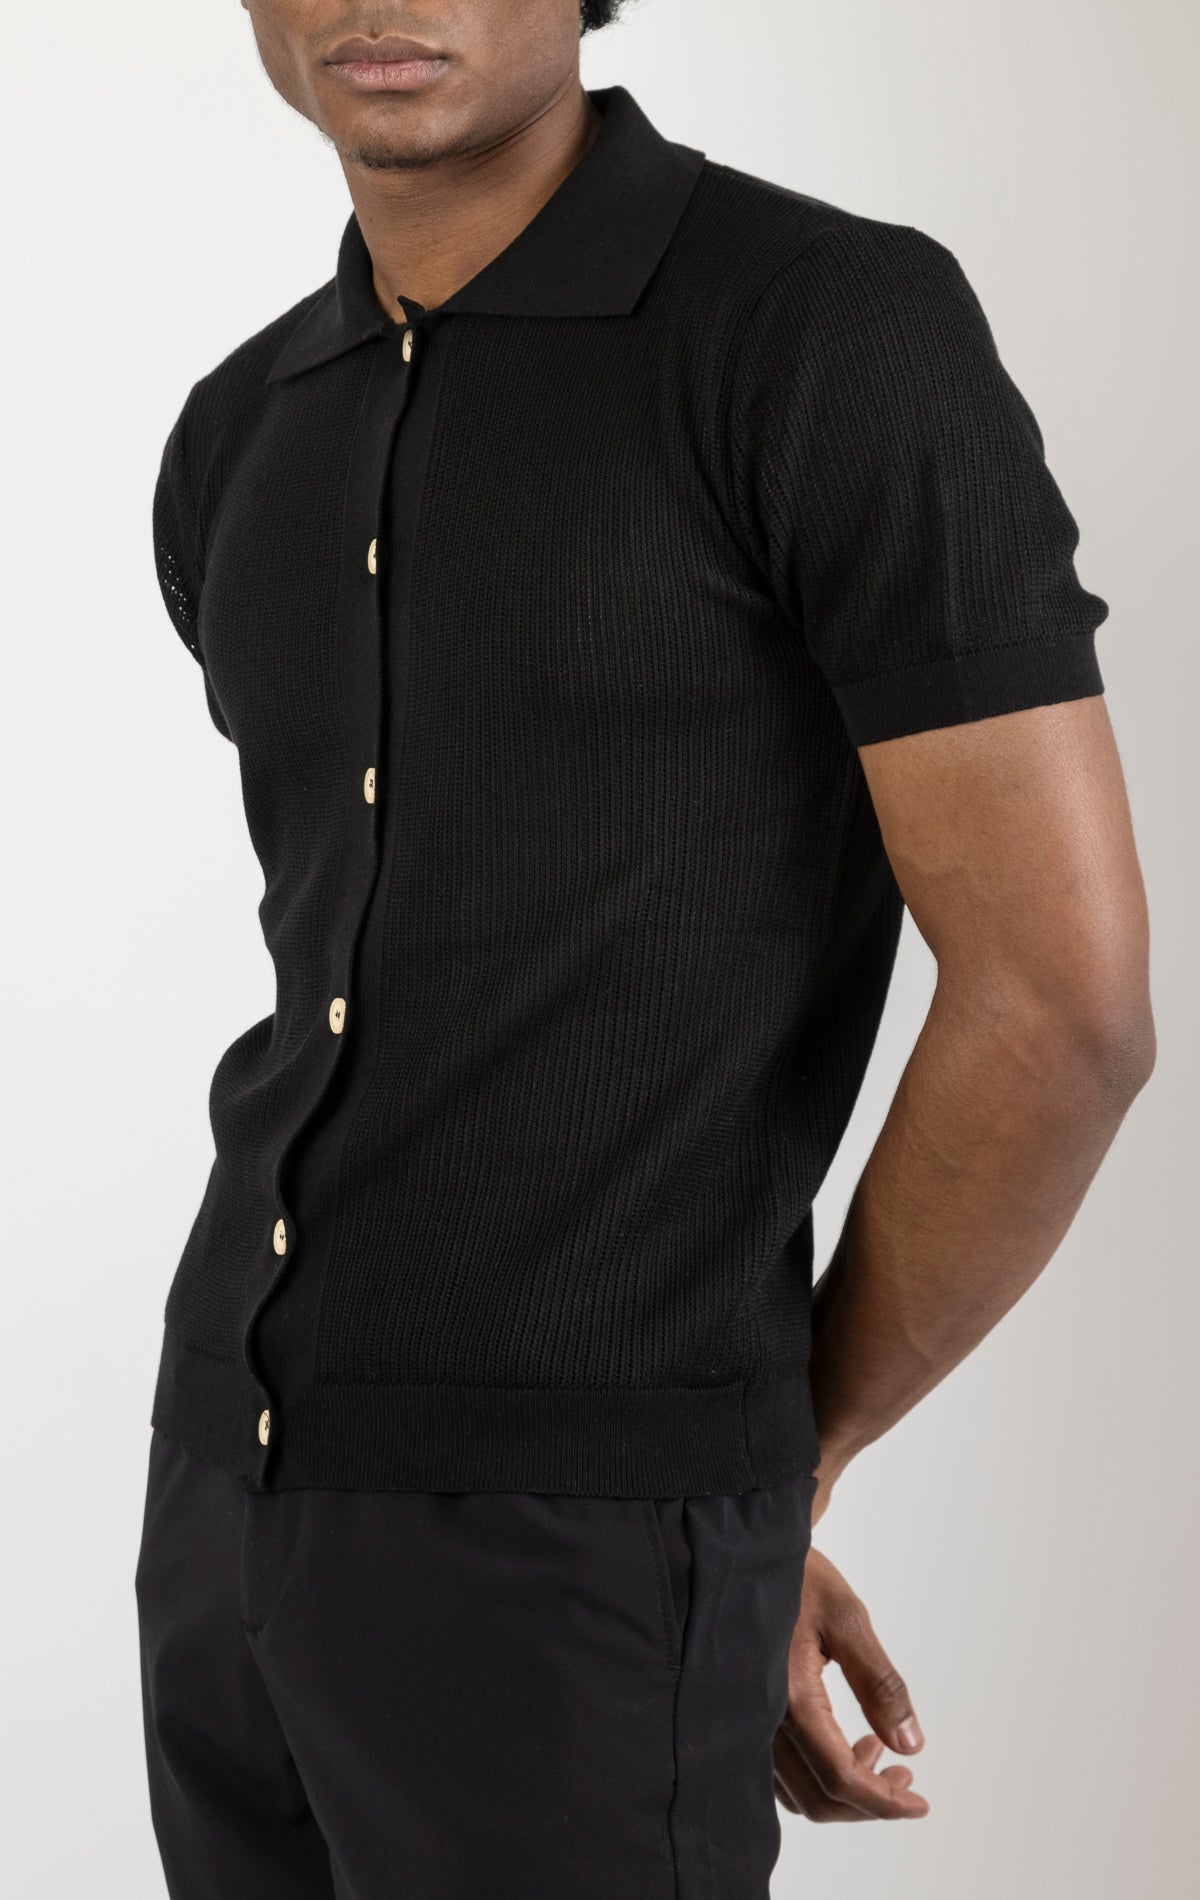 Men's see-through button-down mesh top in black. The top is made from a 50% cotton, 50% acrylic blend and features a tailored fit with a sheer mesh fabric and button-down closure.